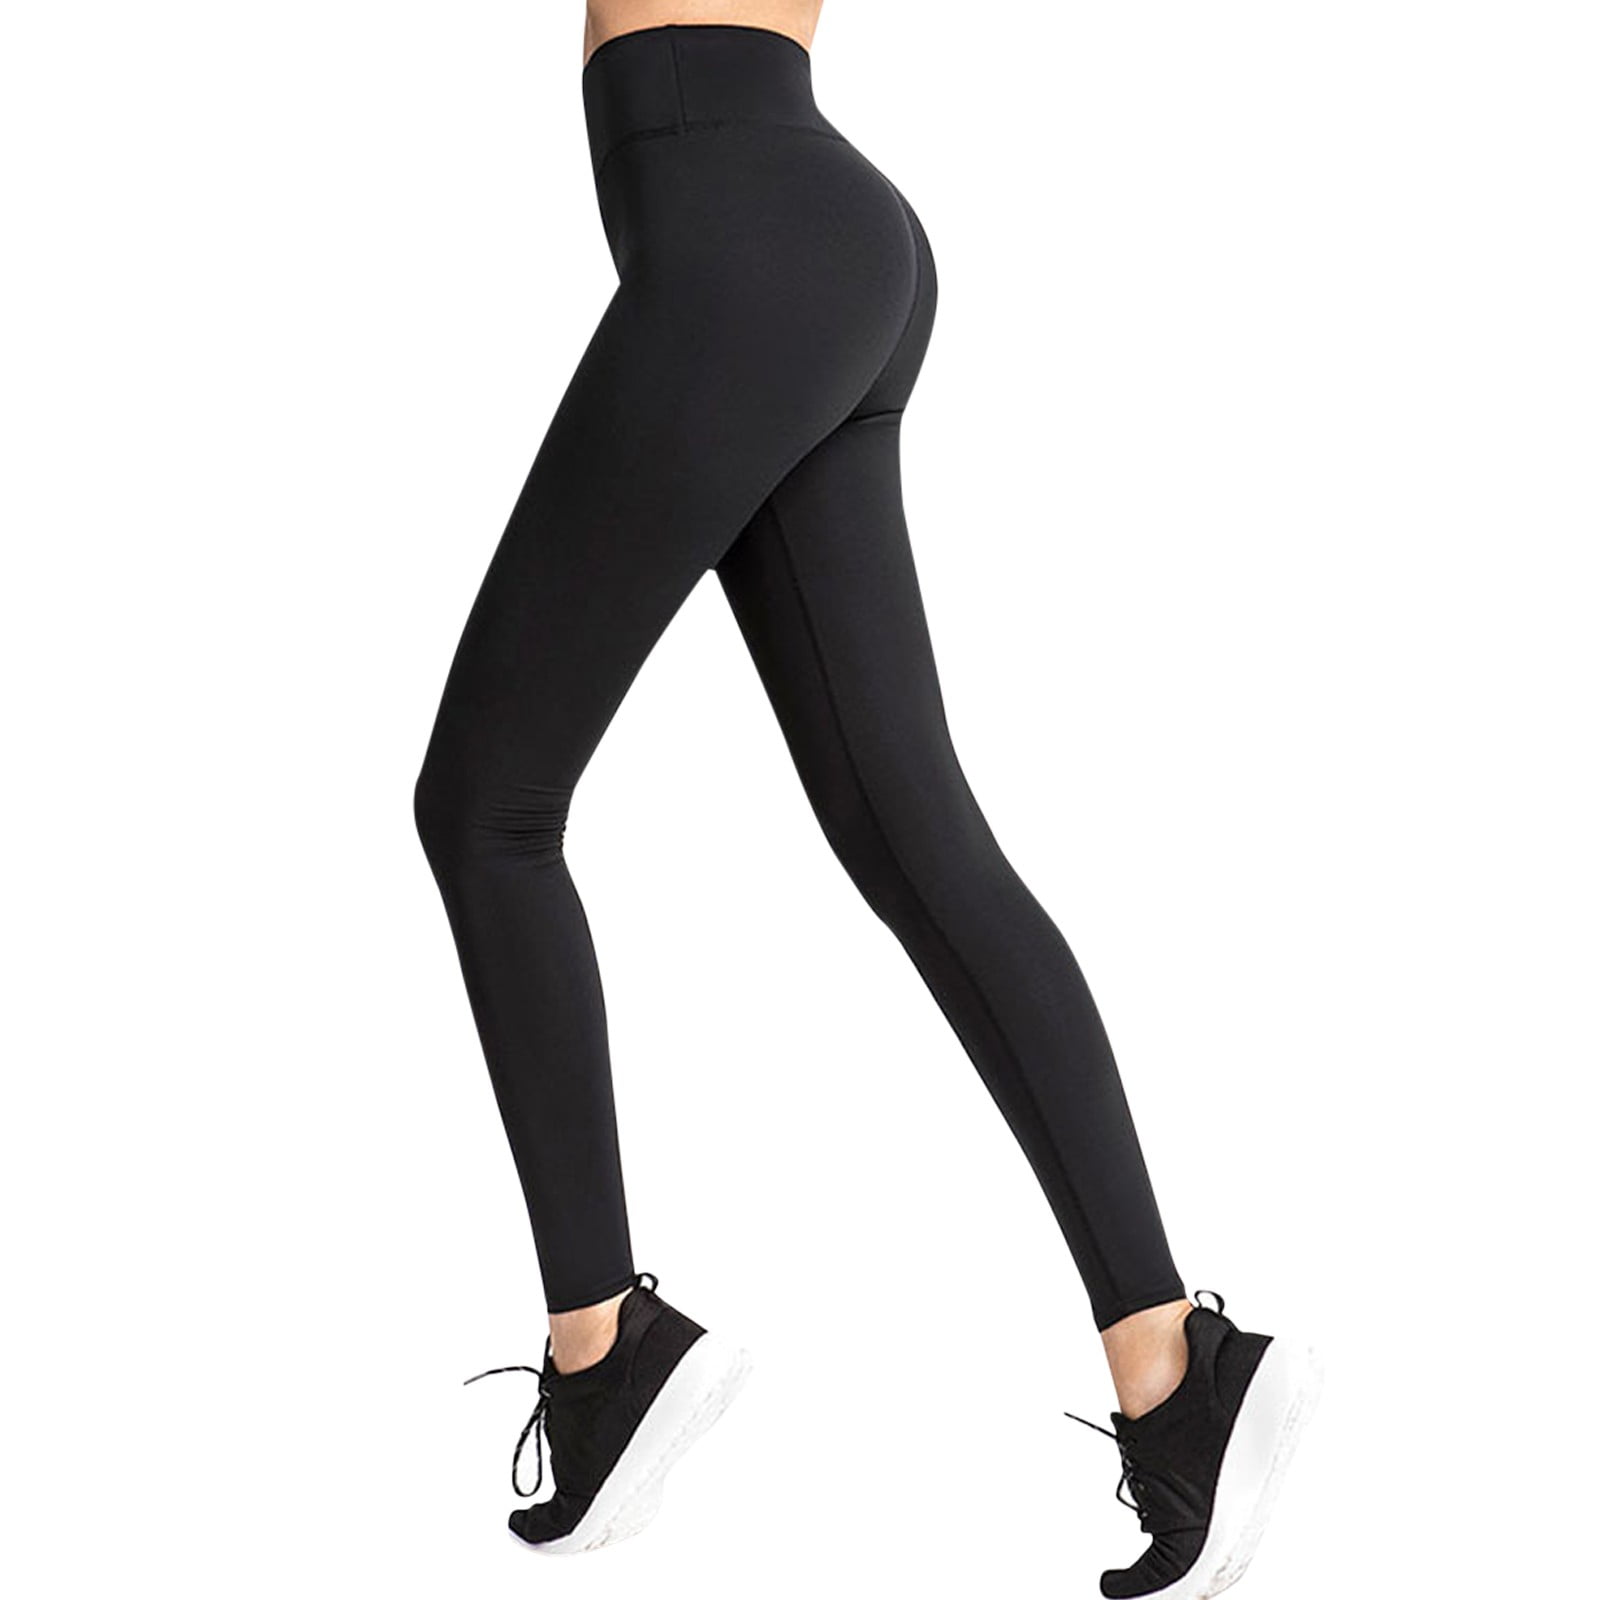  Side Pockets,Extra Tall Womens Yoga Workout Leggings Extra  Long Active Pants,34,Black,Size XL